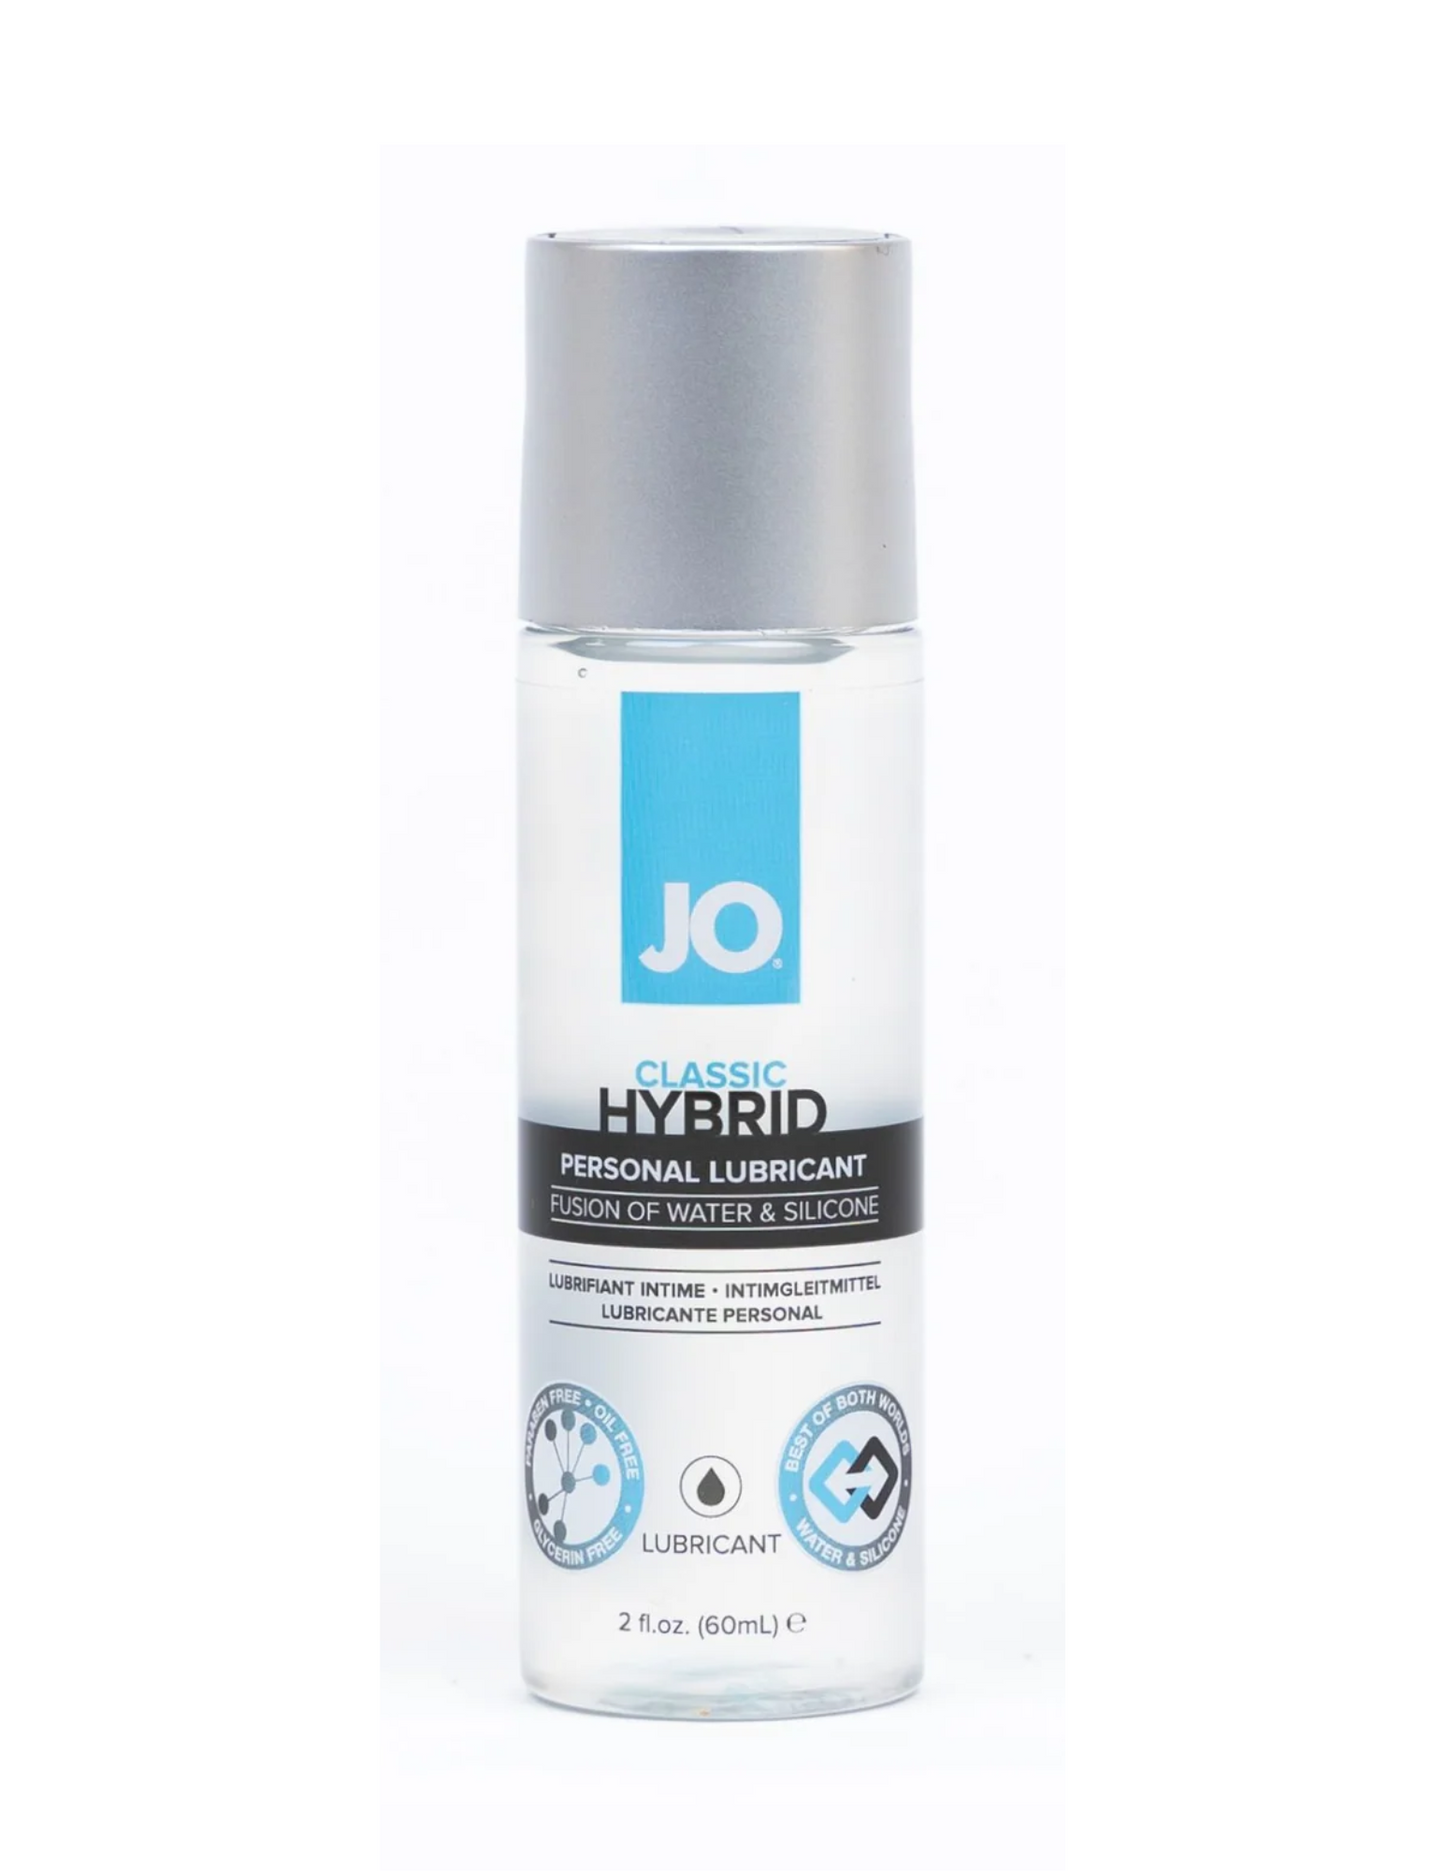 Front image of the System Jo Hybrid lubricant bottle, 2oz.